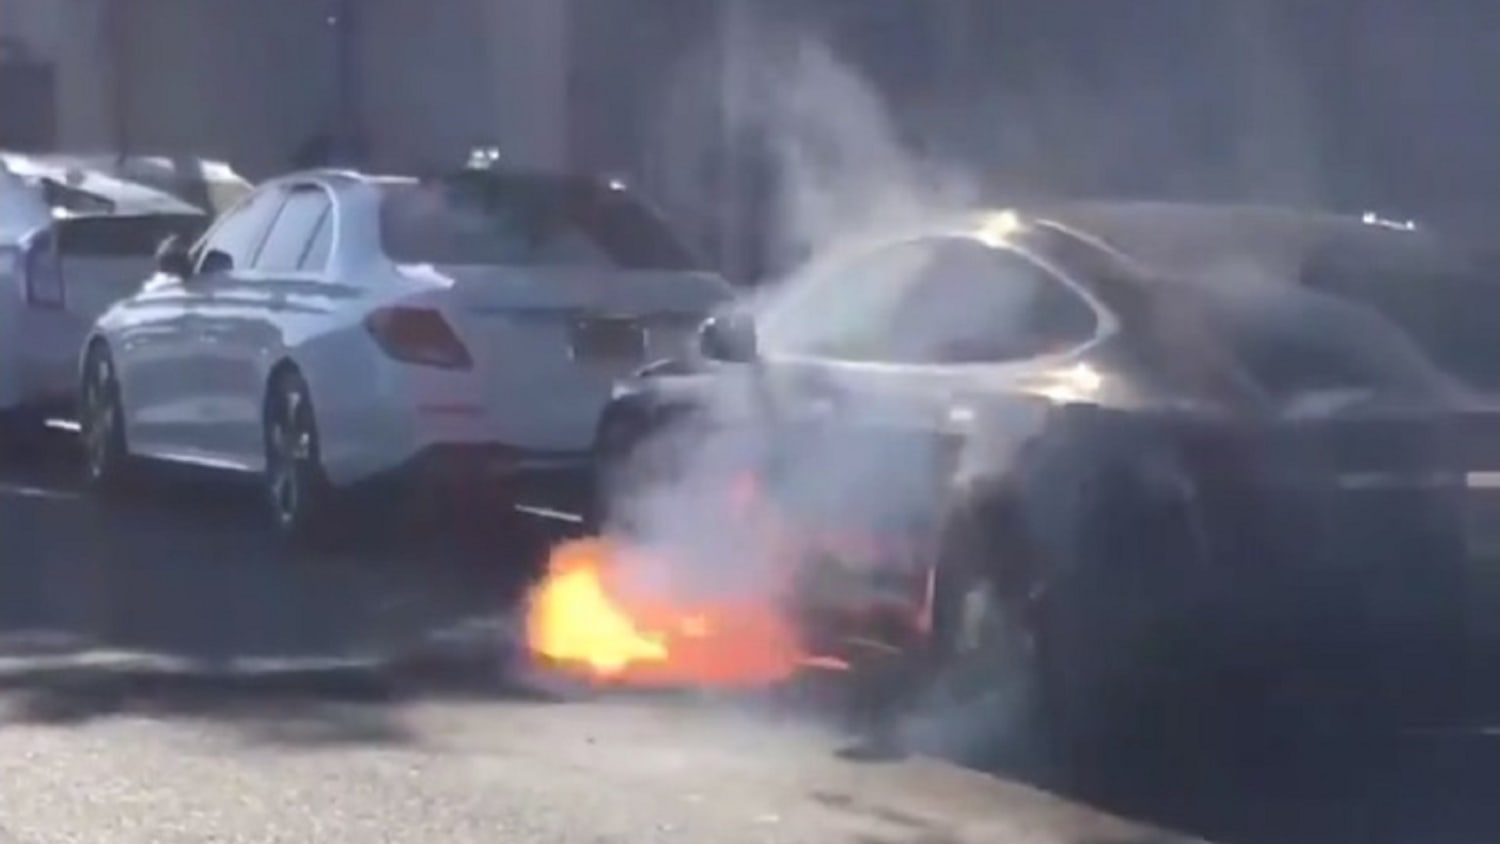 Parked Teslas Keep Catching on Fire Randomly, And There's No Recall In Sight